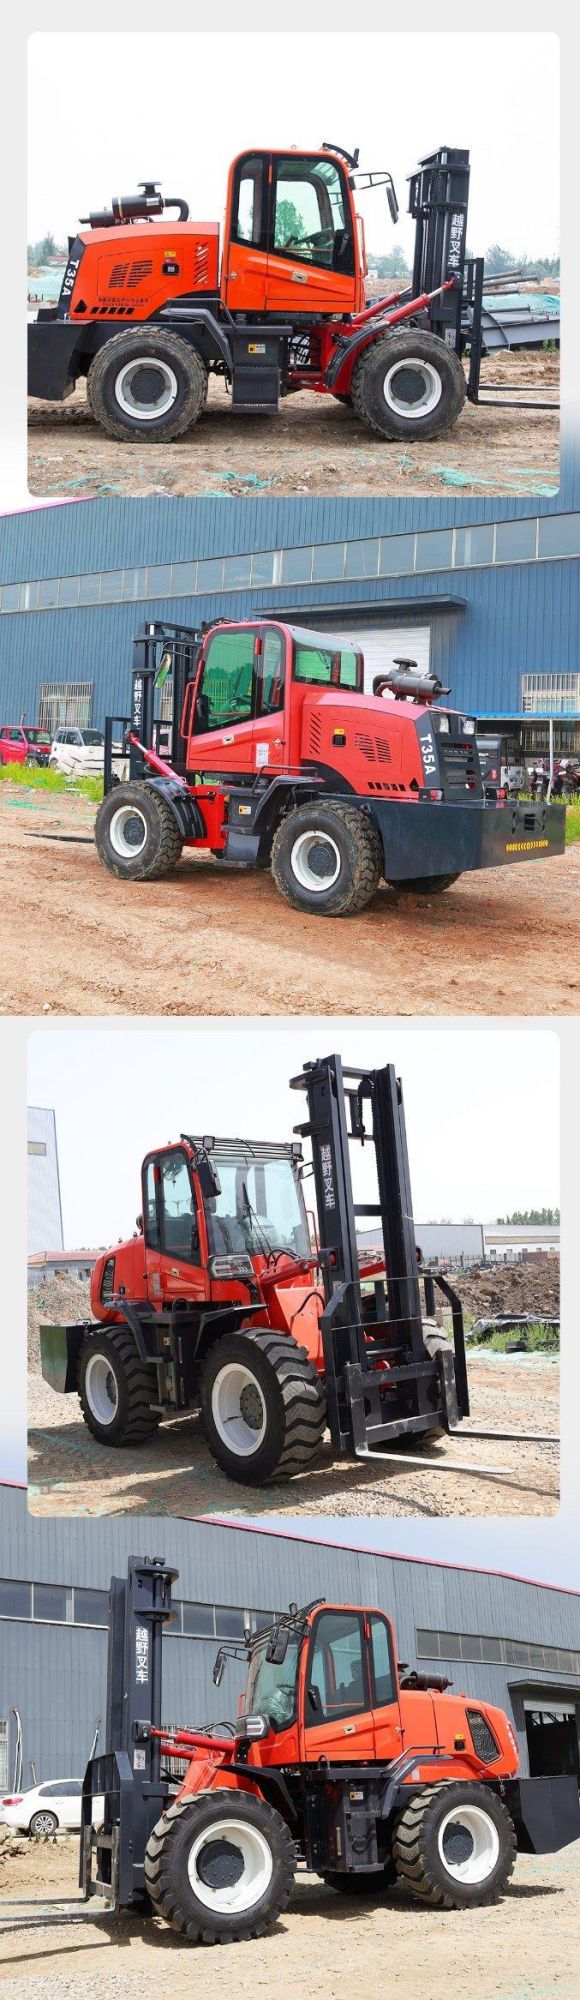 High Quality 7 Ton Diesel Forklift with CE Certificate Made in China